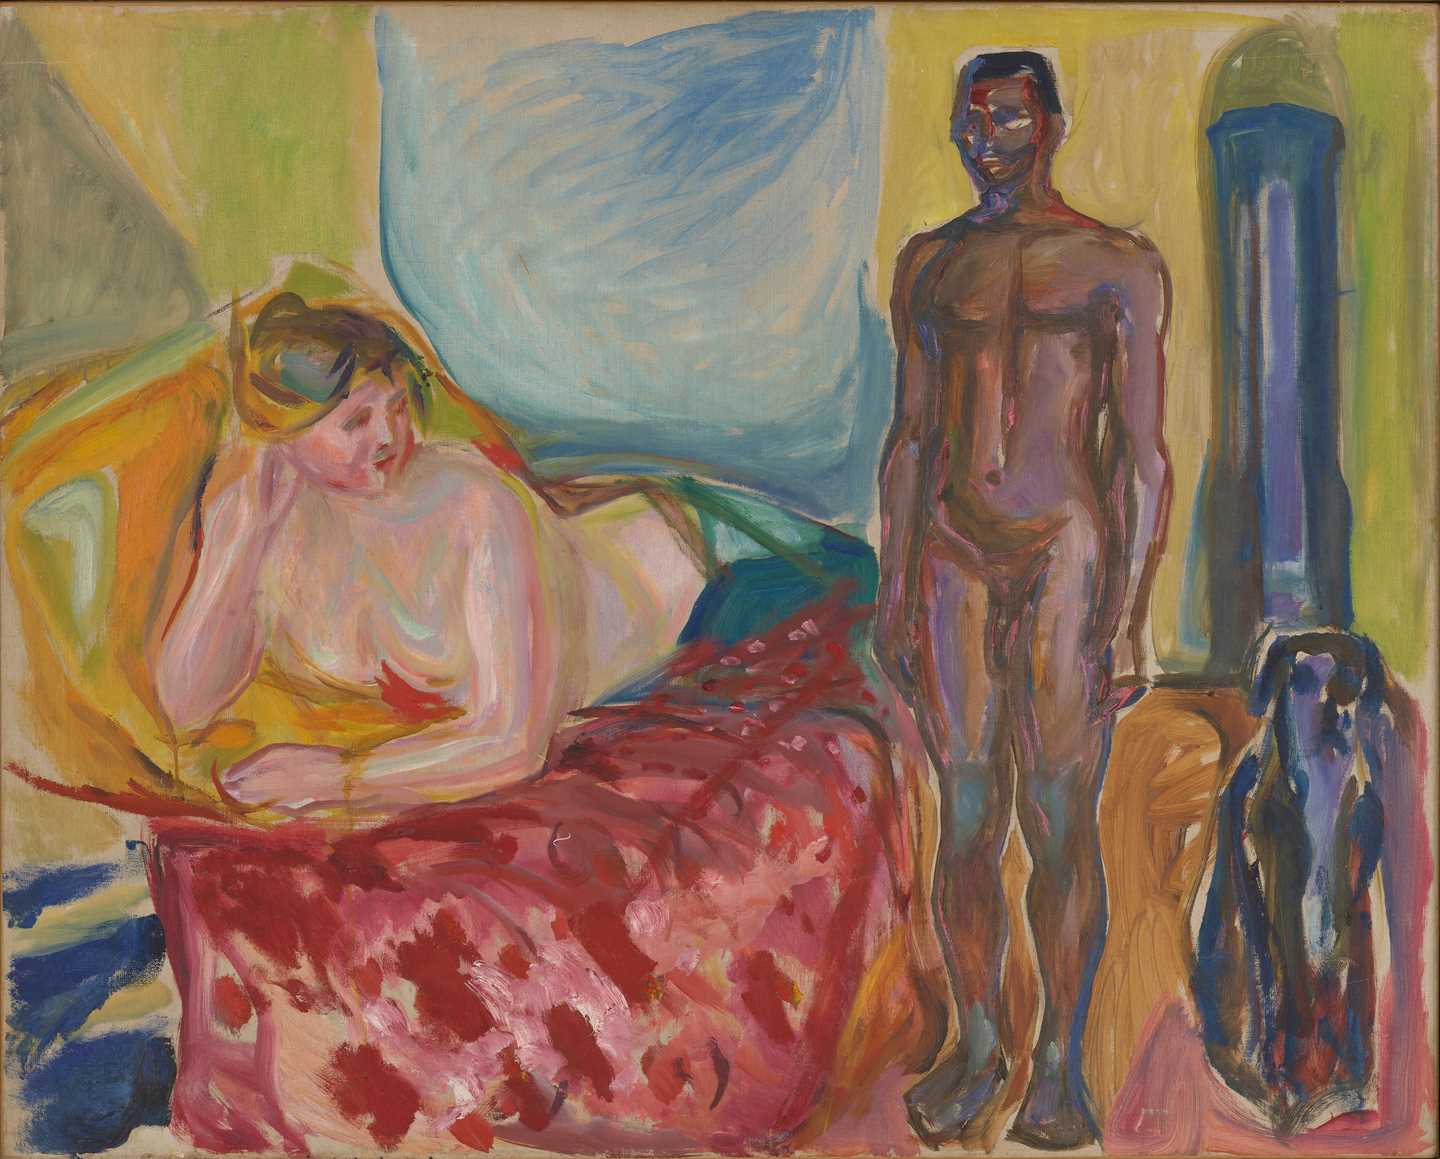 Edvard Munch: Cleopatra and the Slave. Oil on canvas, 1916-1920. Photo © Munchmuseet